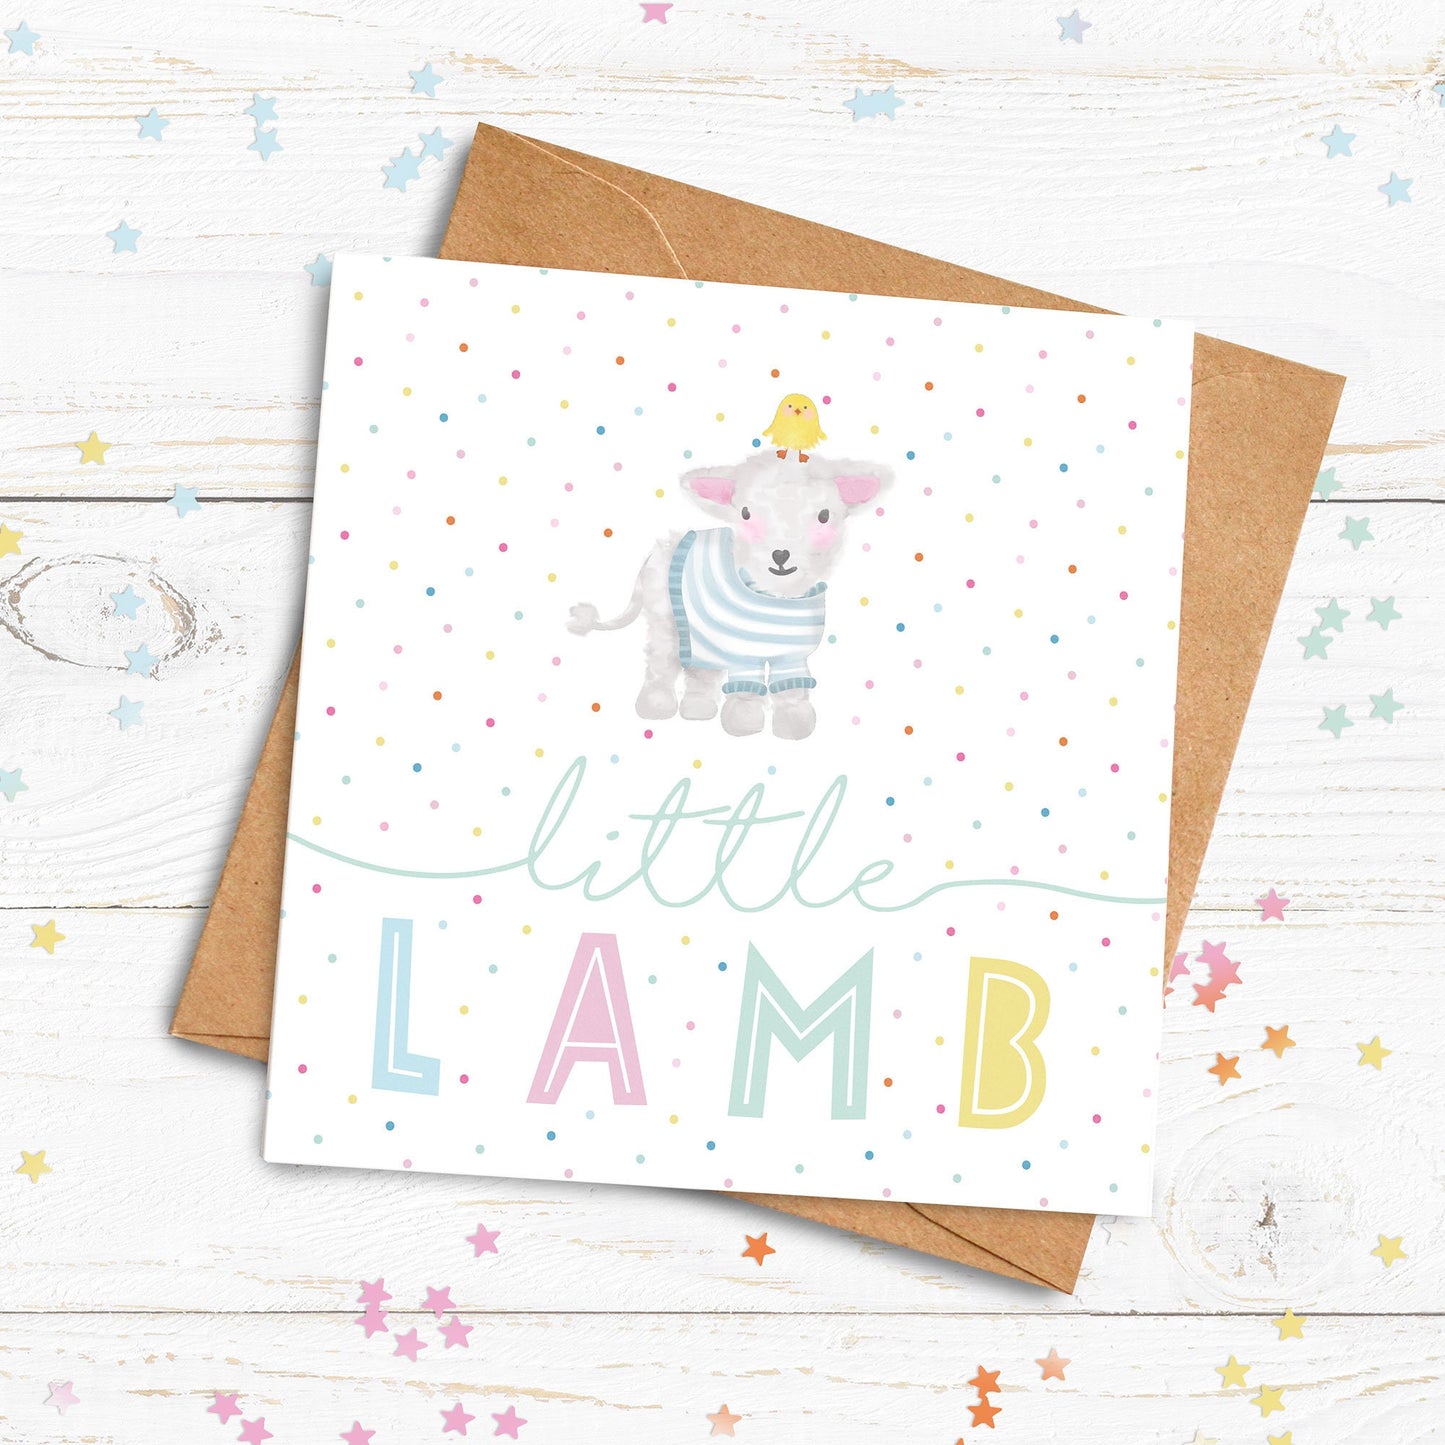 Little Lamb Personalised Card. First Easter Card. Personalised Baby Card. Personalised New Baby Card. Cute Lamb. Send Direct Option.